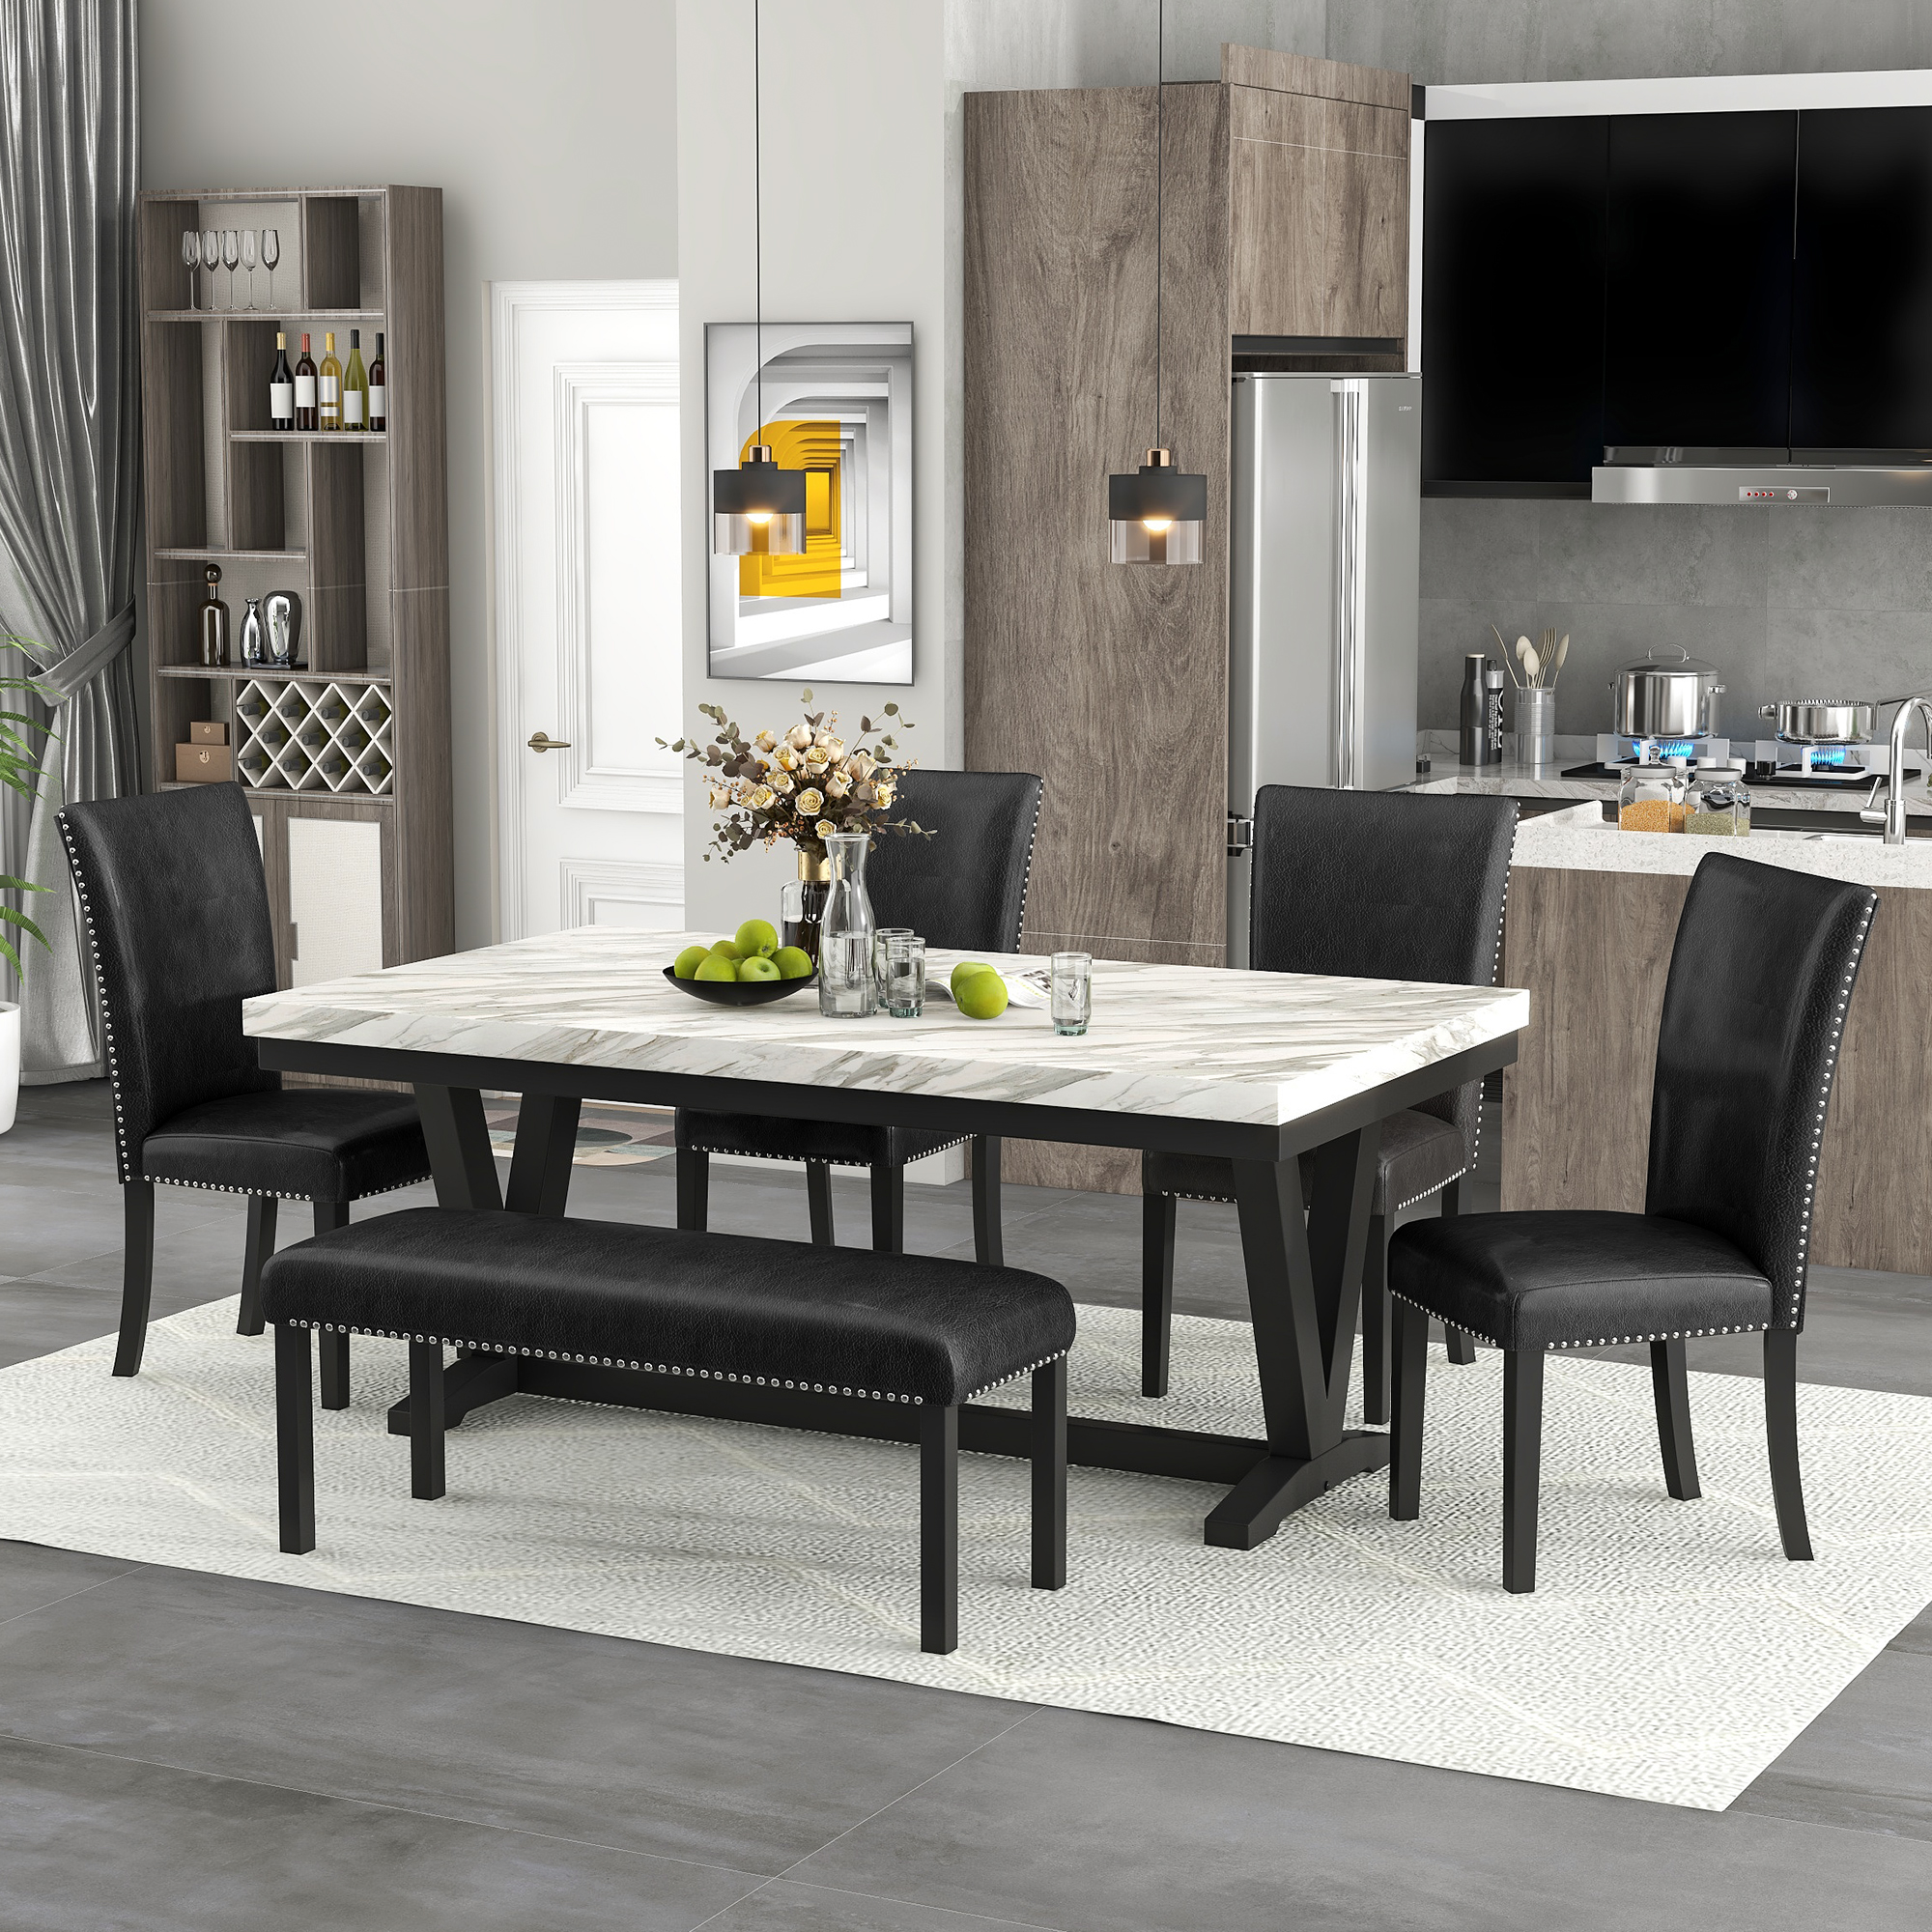 6-piece Dining Table Set with 1 Faux Marble Top Table,4 Upholstered Seats and 1 Bench,Table: 72in.Lx42in.Wx30in.H, Chair: 19.75in.Lx21.25in.Wx38.25in.H, Bench:46in.Lx16in.Wx20in.H.